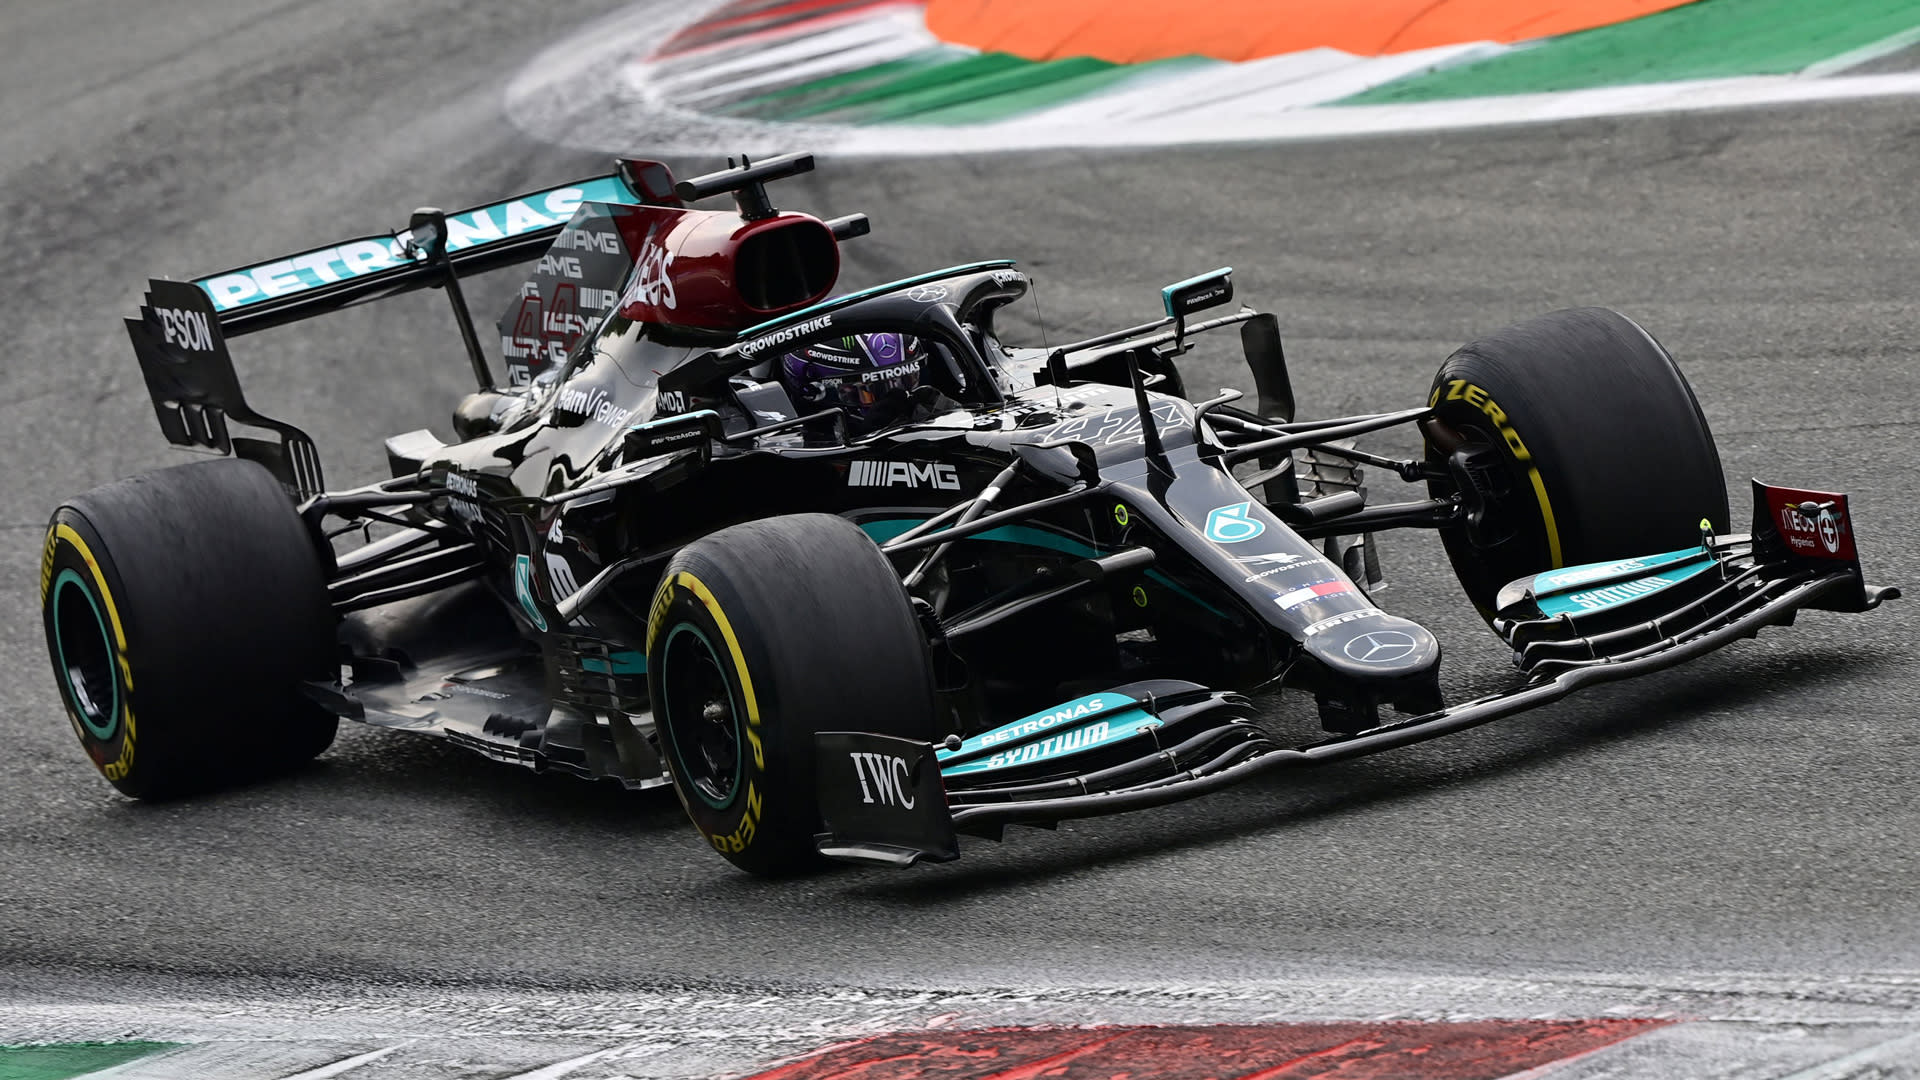 2021 Italian Grand Prix FP1 report and highlights Hamilton leads Verstappen in first practice before qualifying at Monza Formula 1®